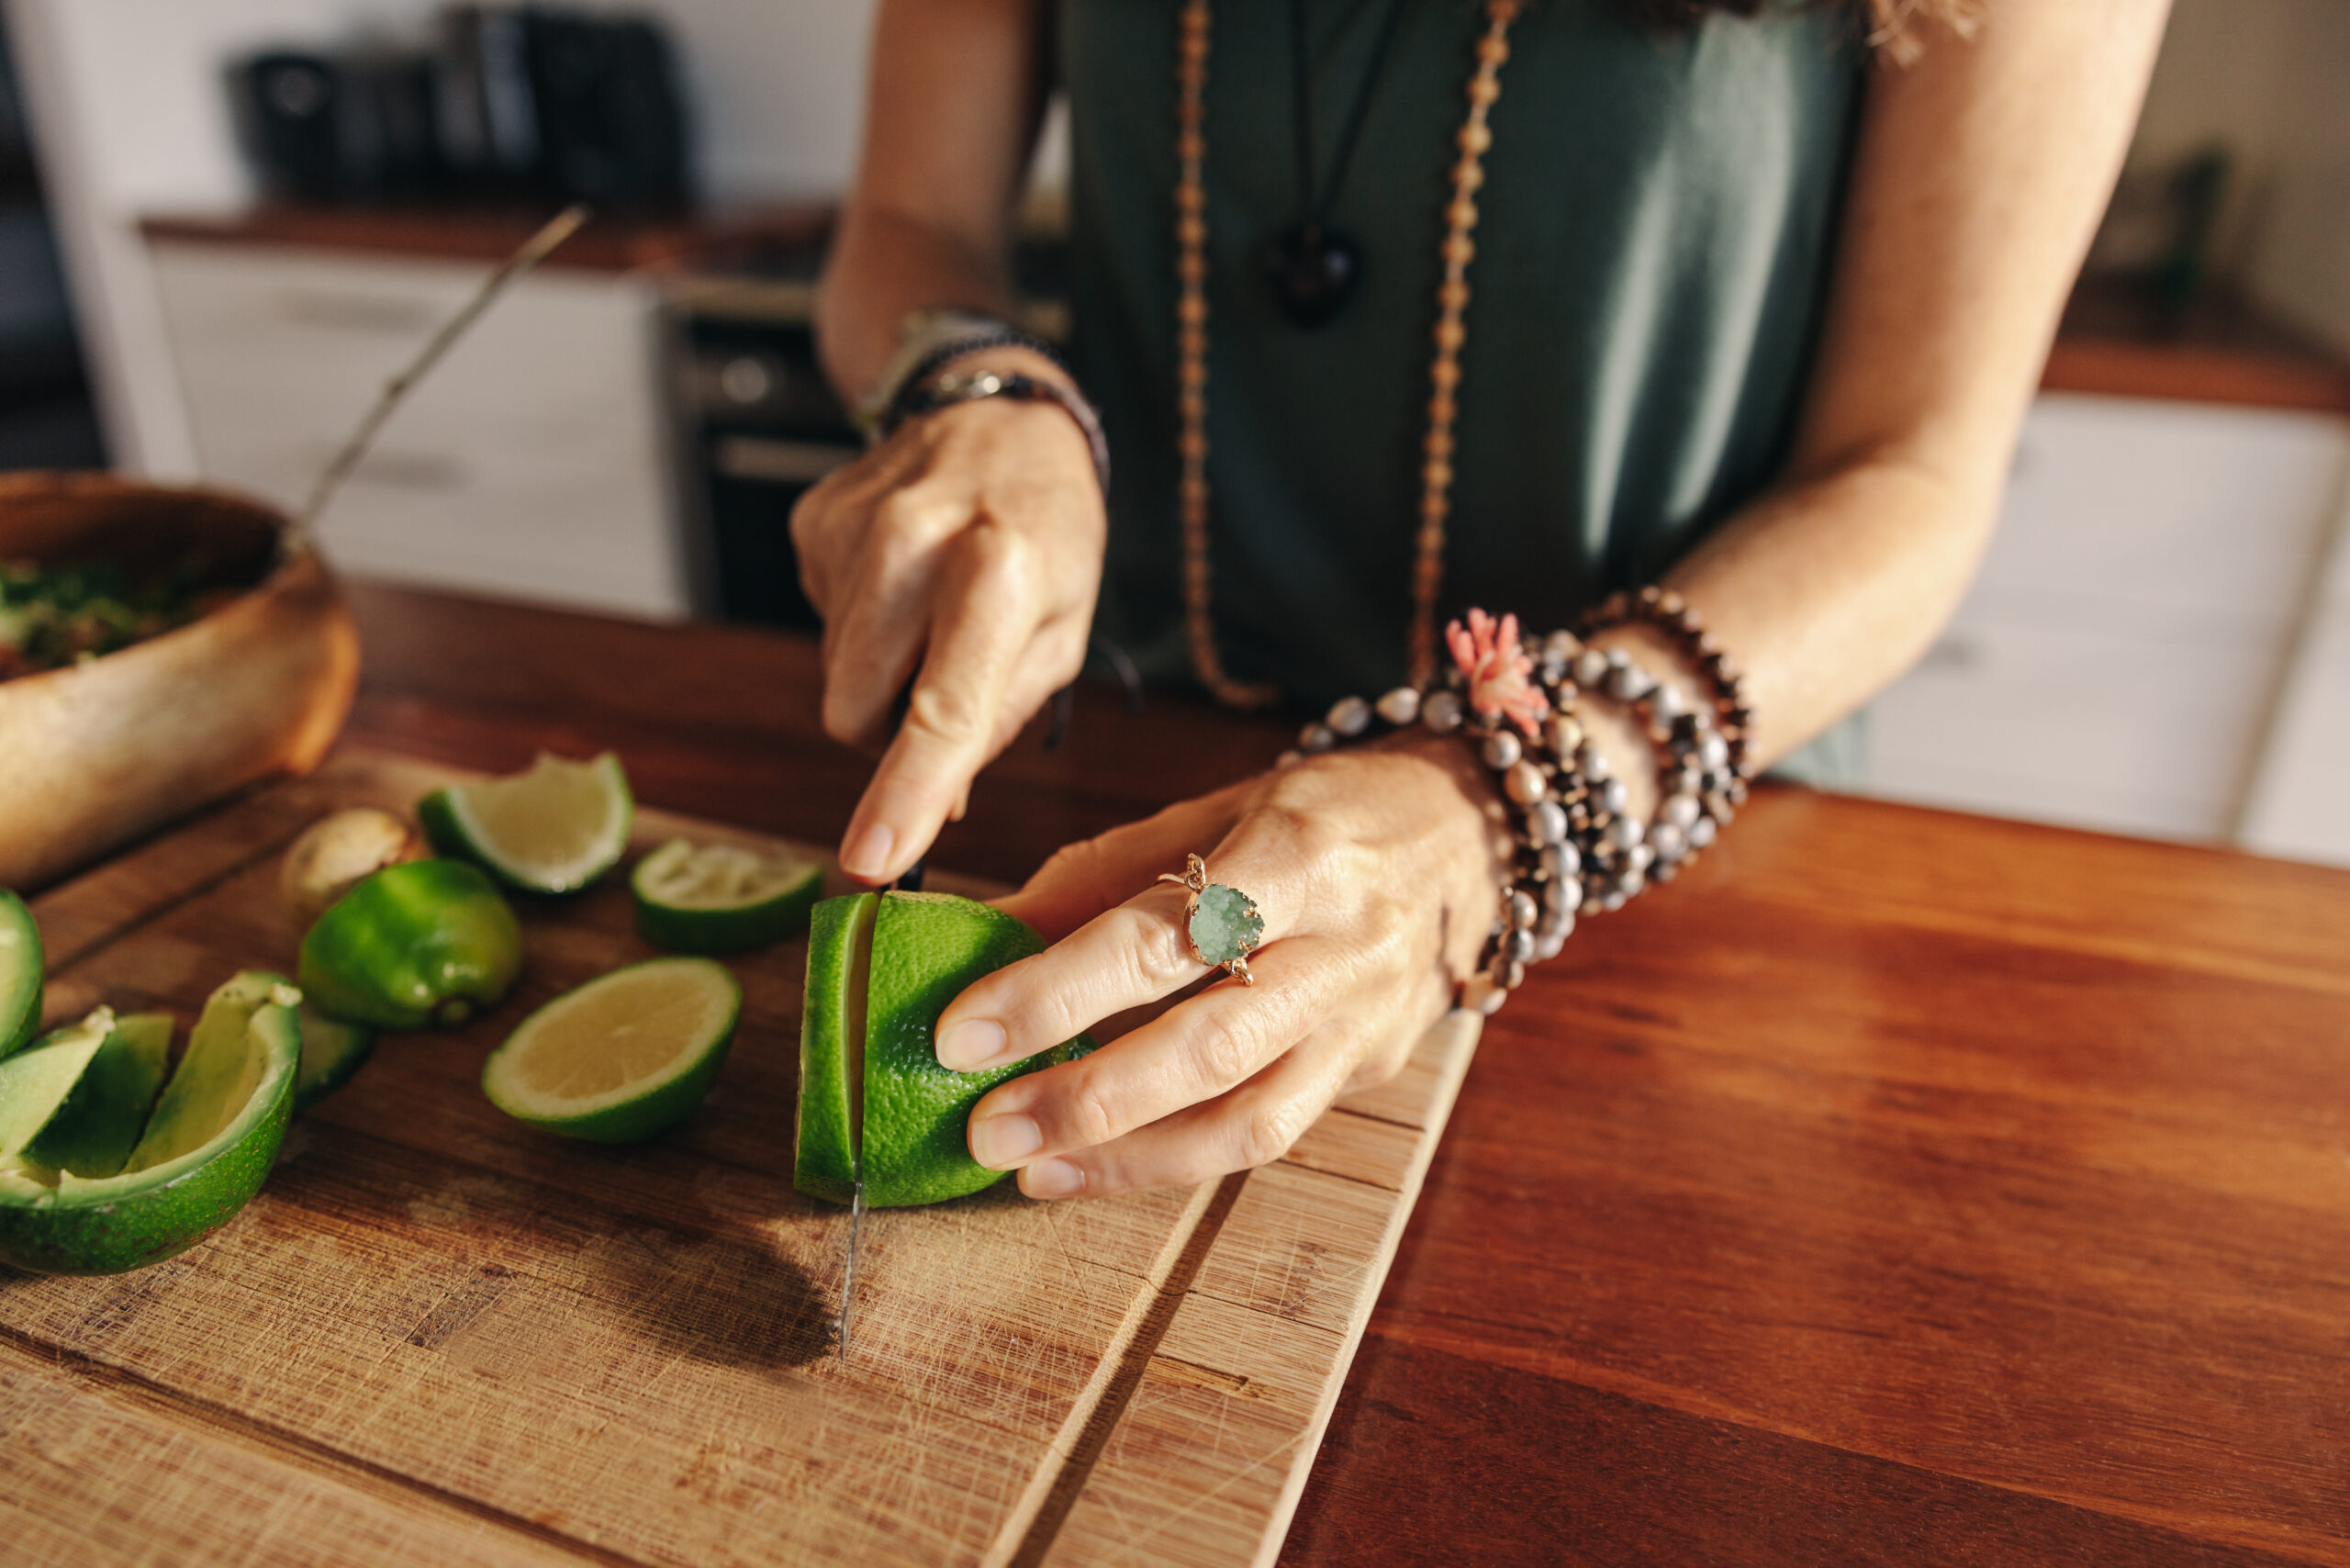 Vegetarian senior woman cutting some limes for green juice in her kitchen. Mature woman preparing a healthy plant-based meal at home. Woman taking care of her aging body with an organic diet.